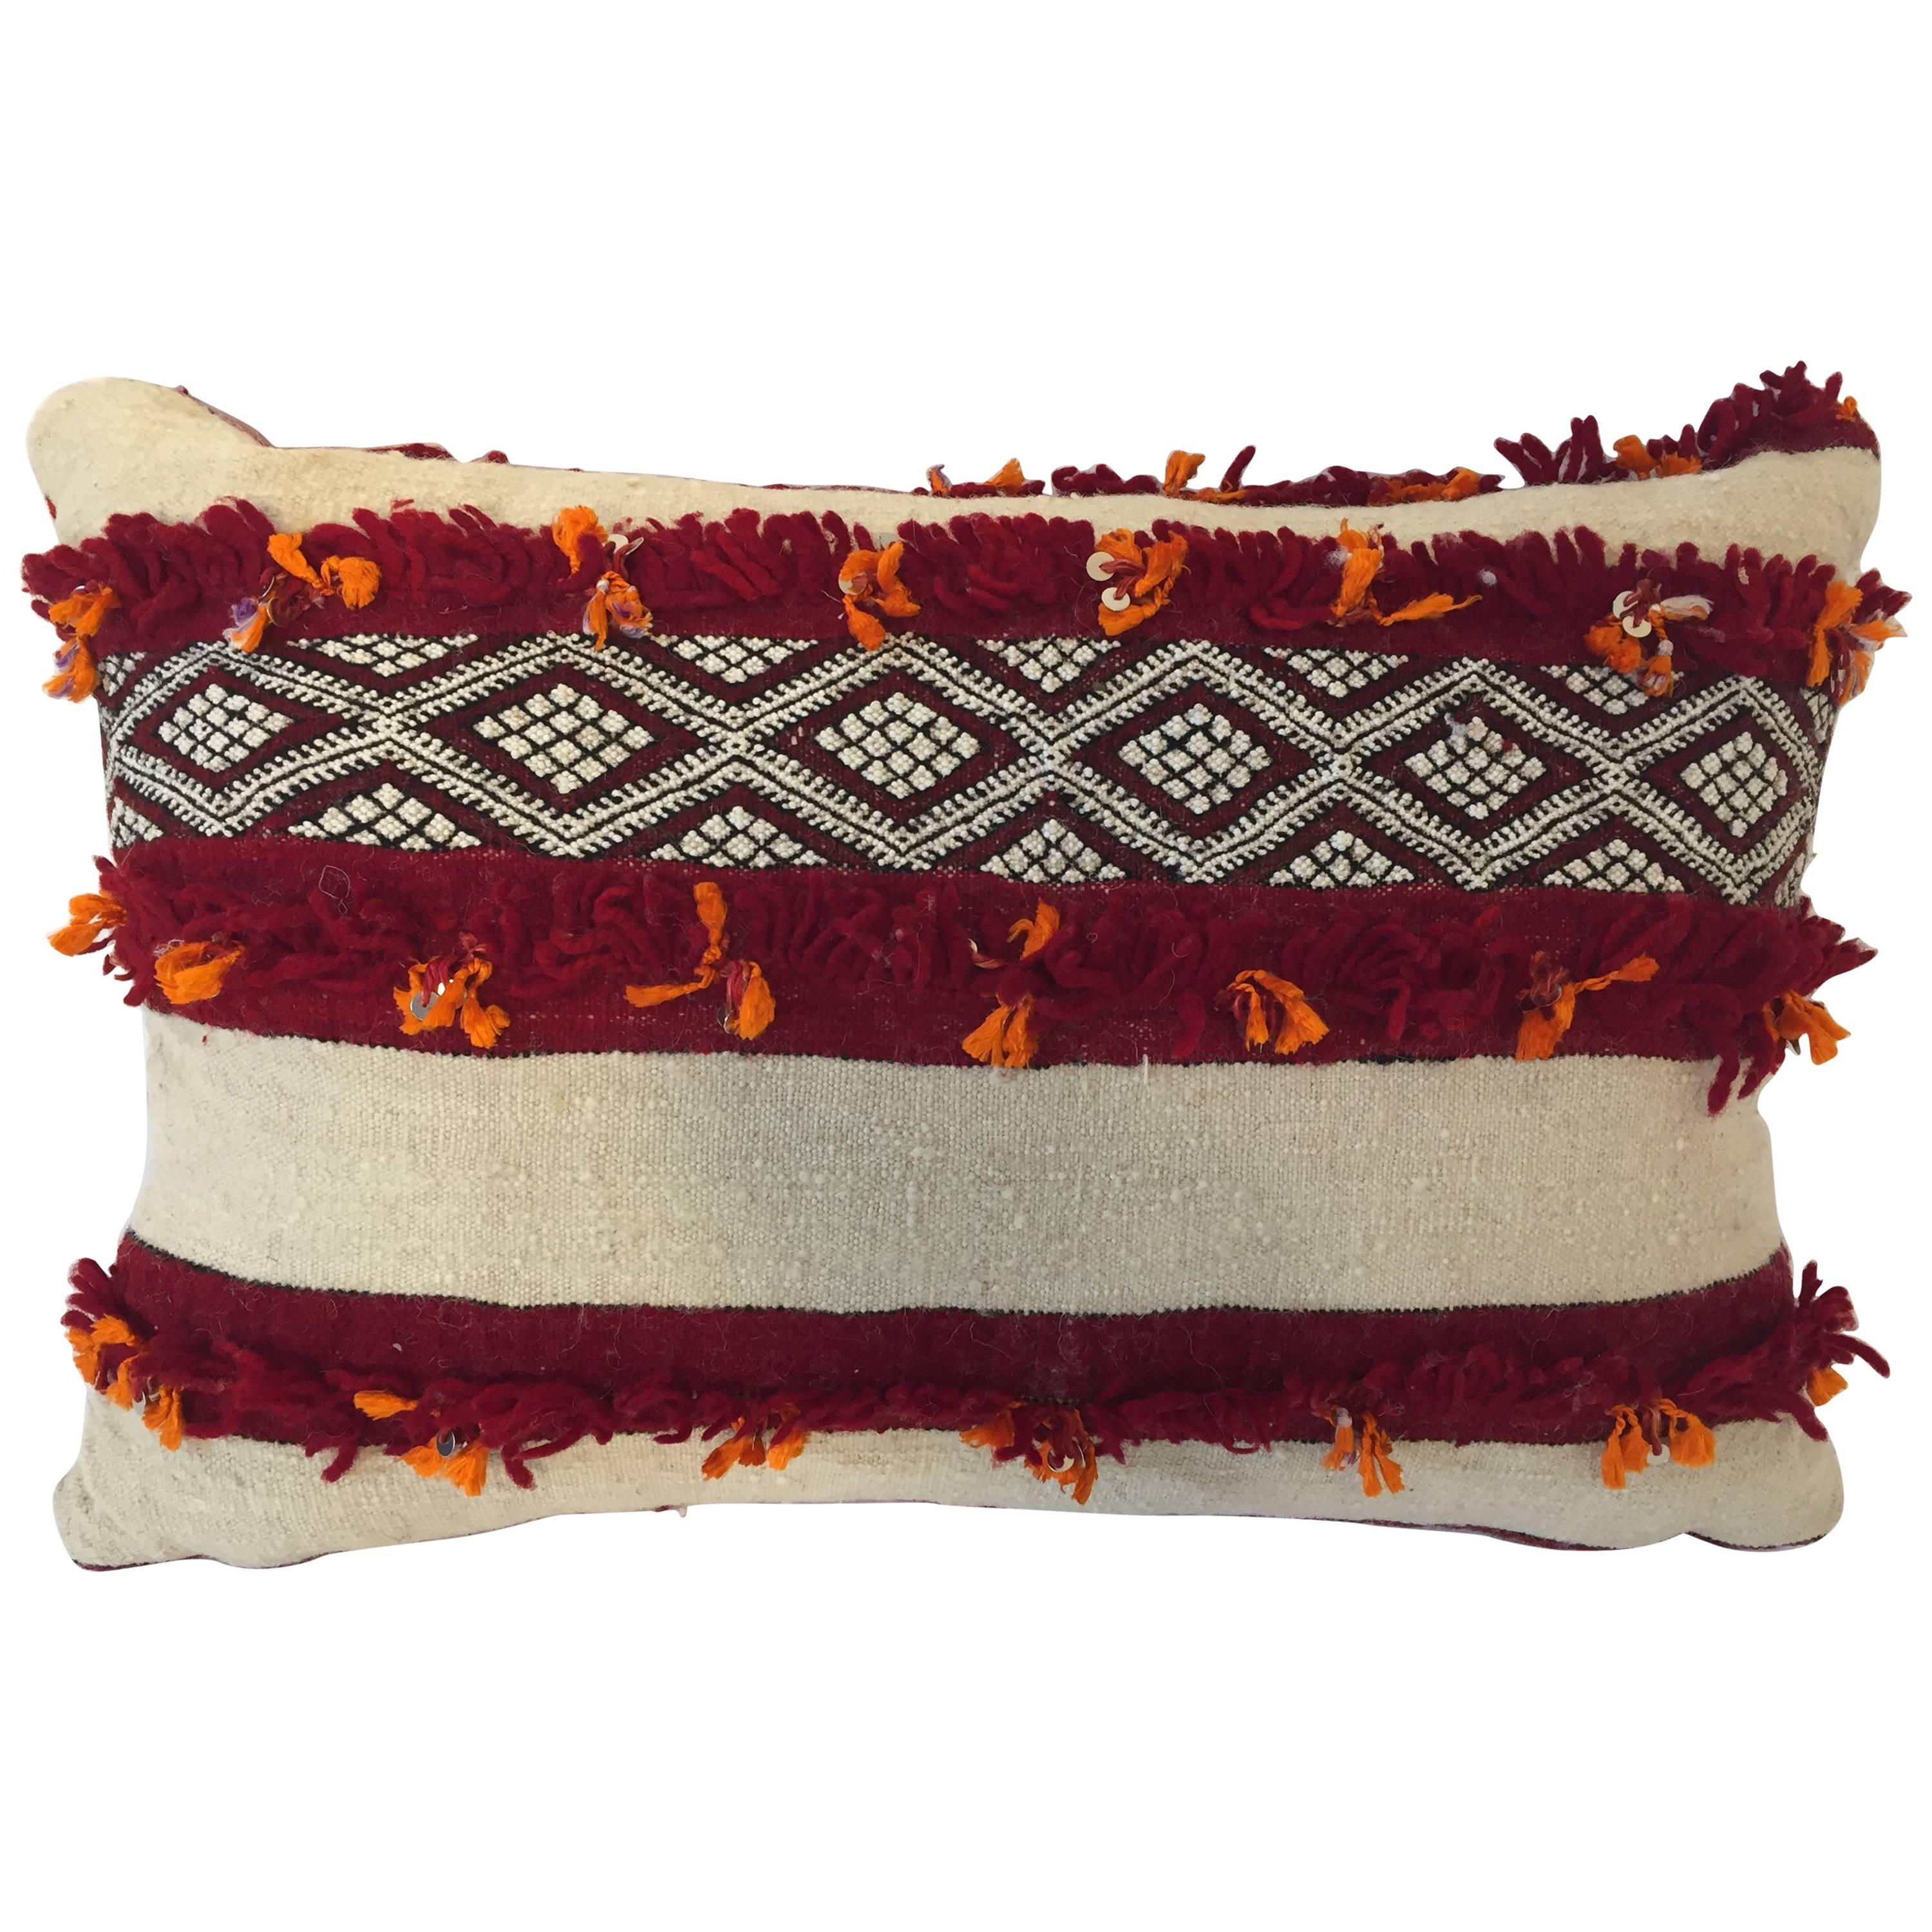 Moroccan Berber Pillow with Tribal Designs Red and Ivory Color